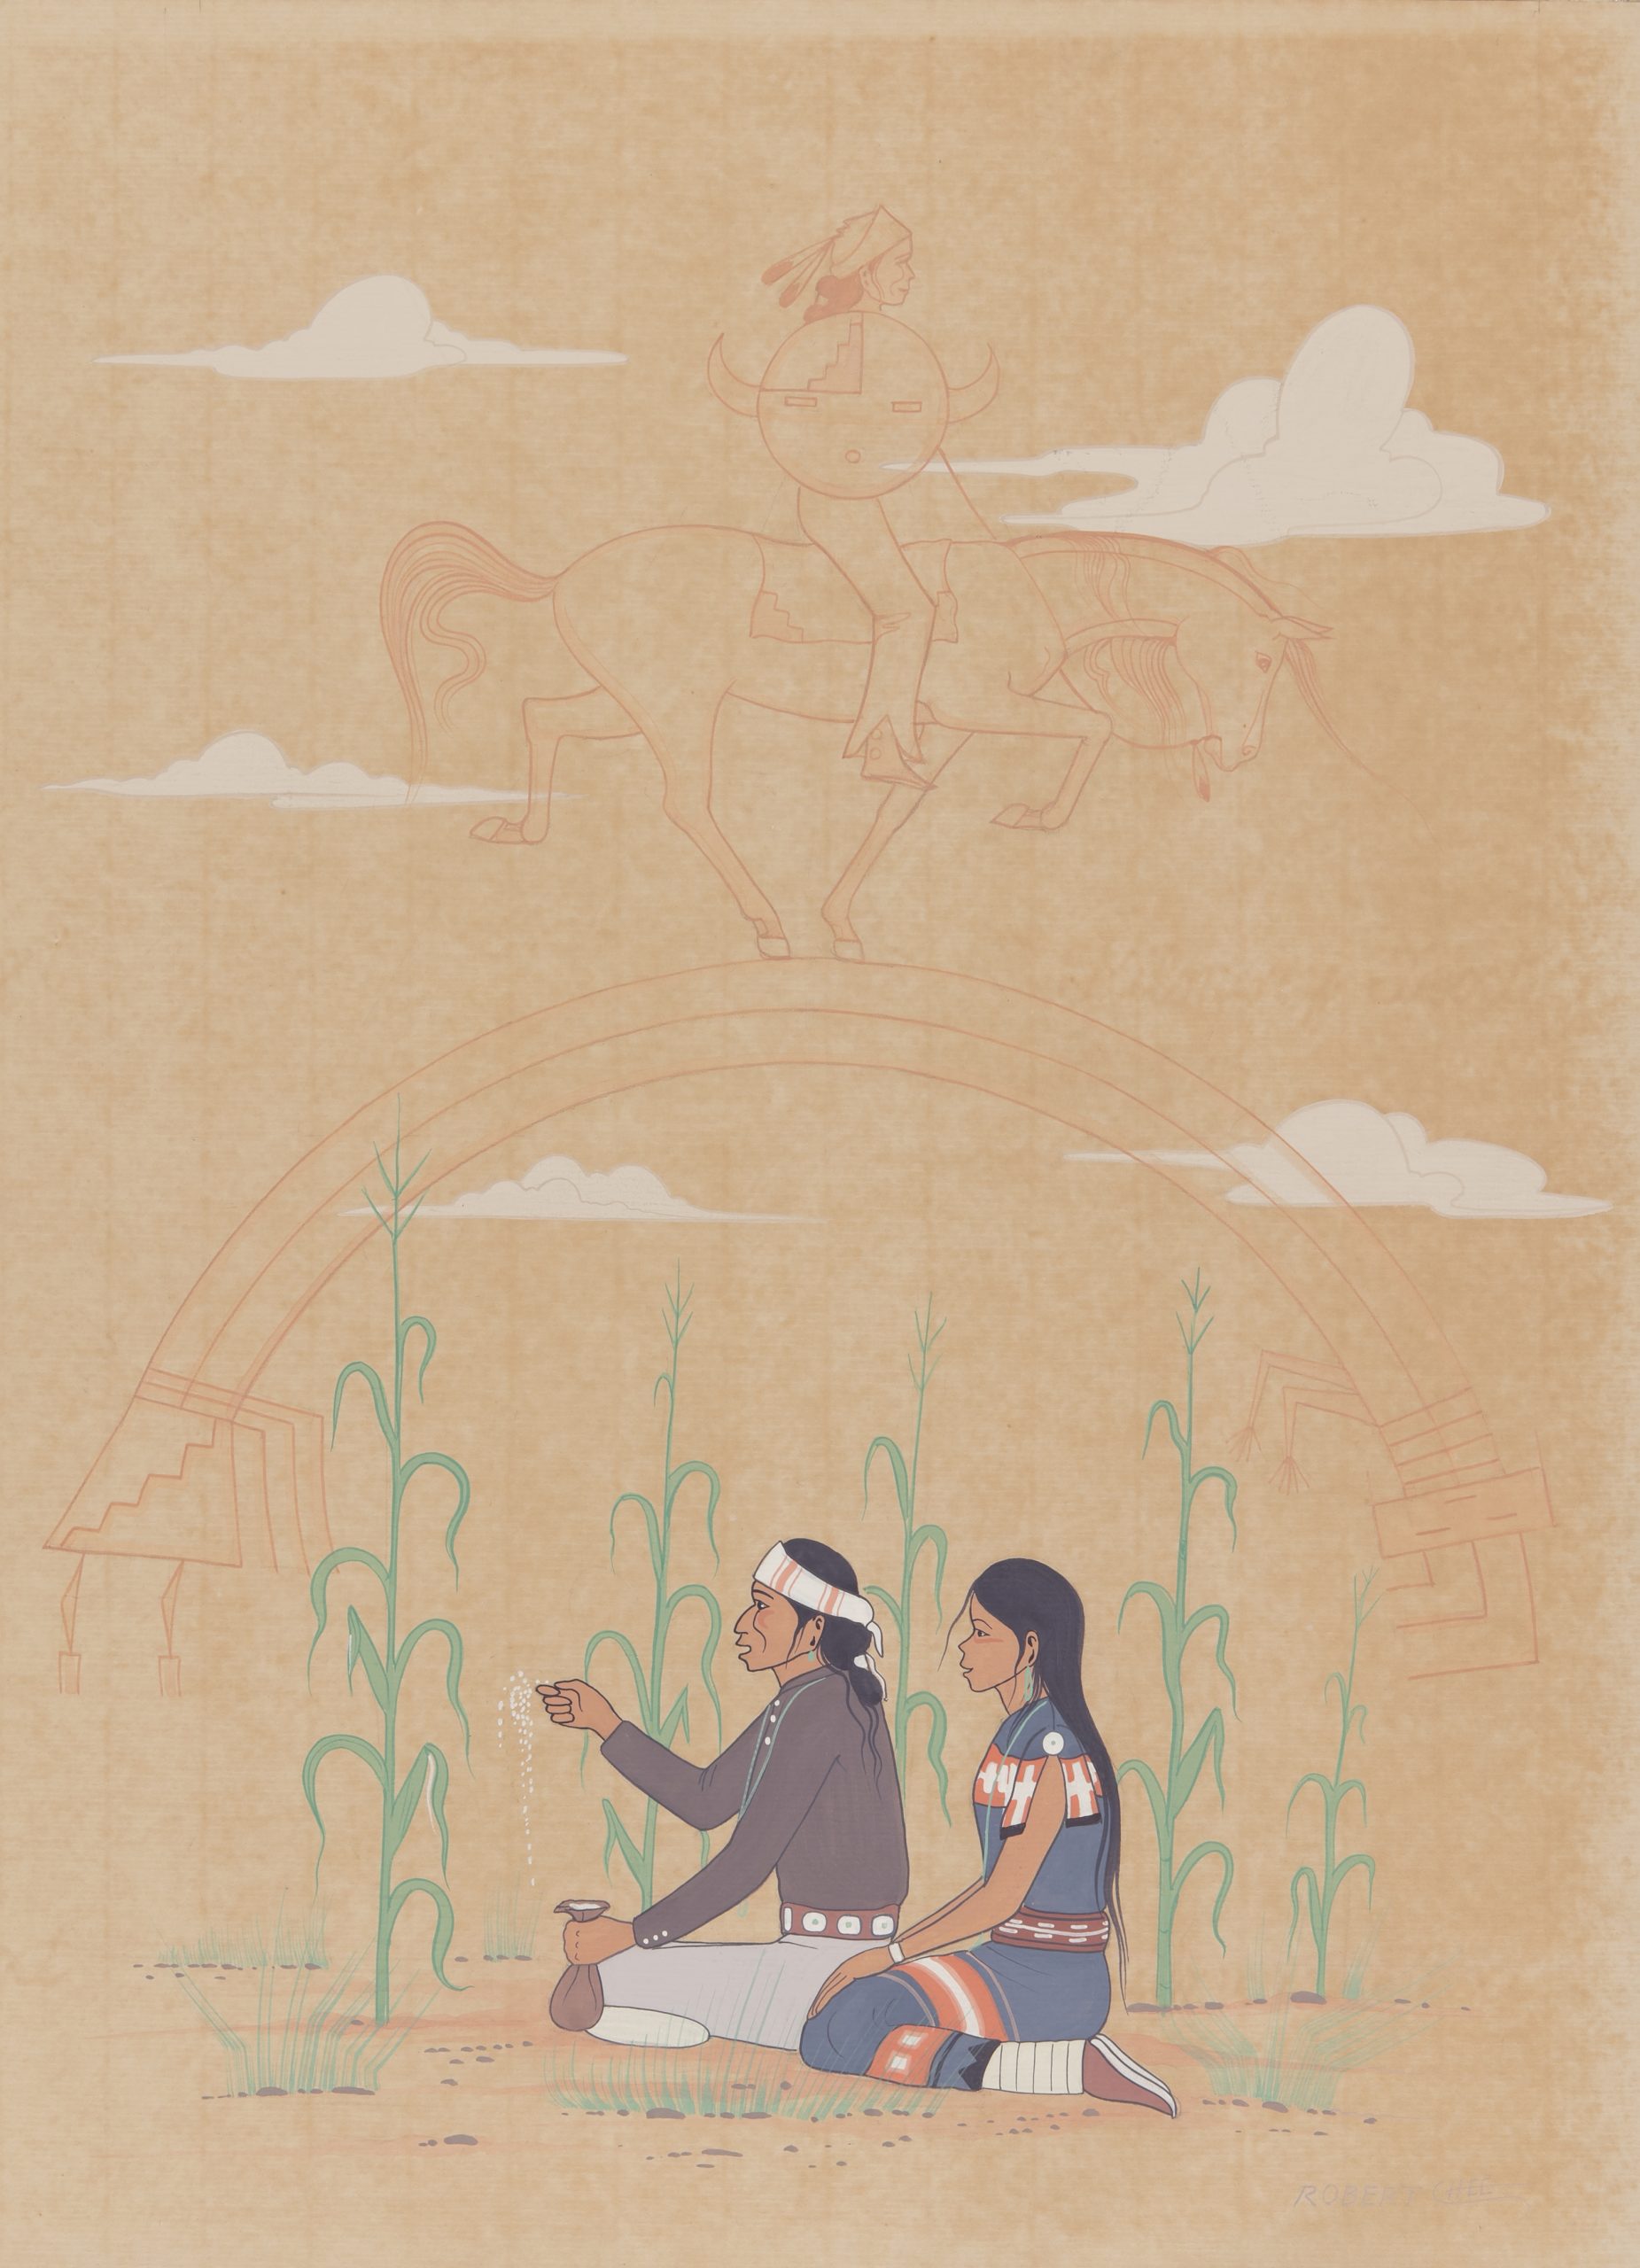 Robert Chee. Navajo Corn Blessing Ceremonial at Midday, c. 1960s. Illustration board, gouache paint. 20 x 15 in. SAR.1969-30. Photograph by Addison Doty. Copyright 2019 School for Advanced Research.